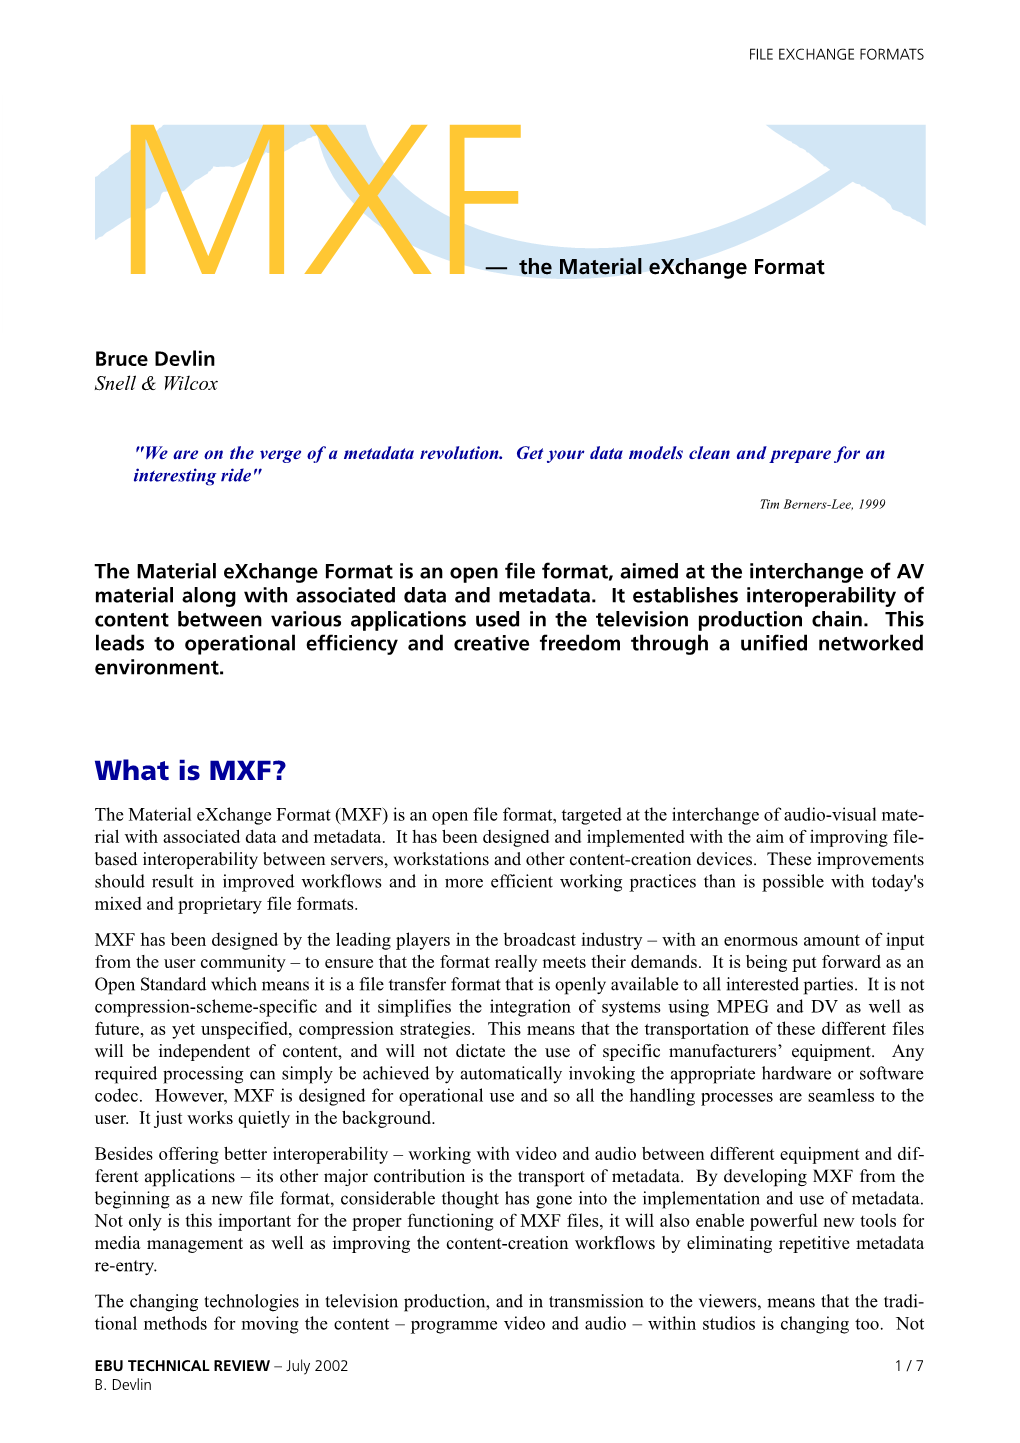 MXF— the Material Exchange Format